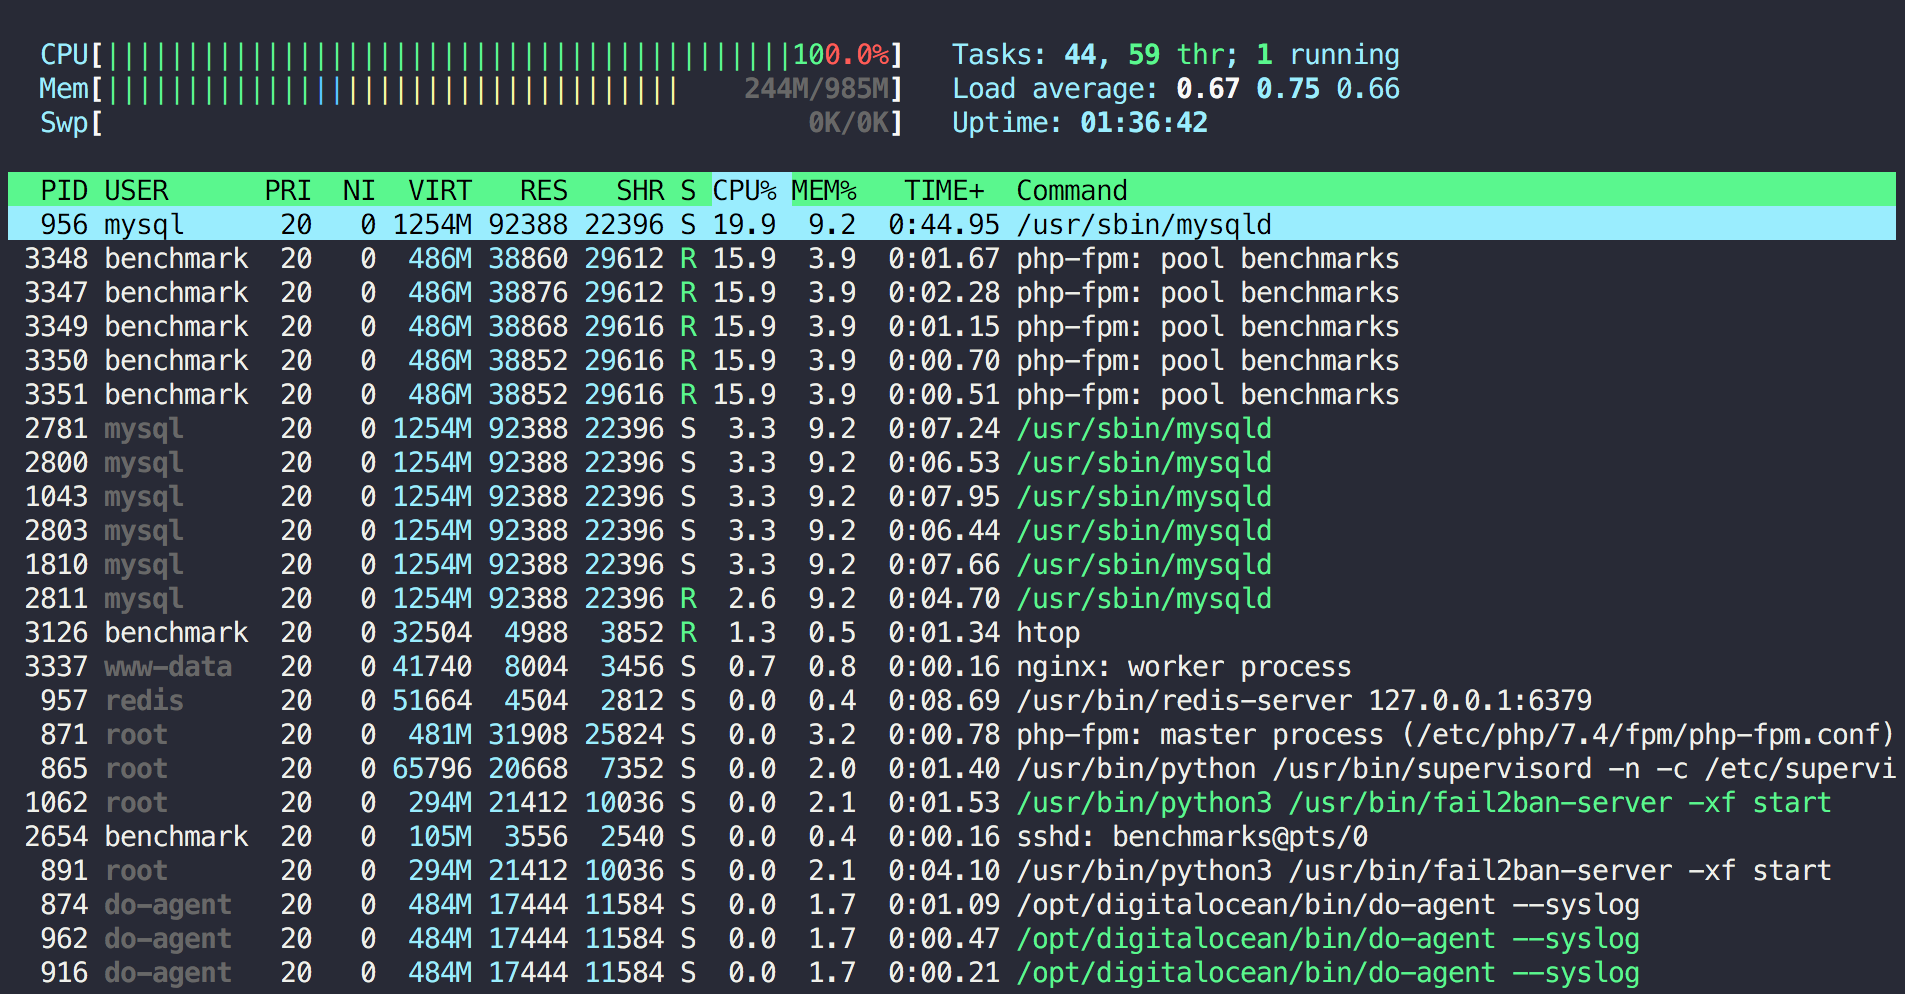 htop results